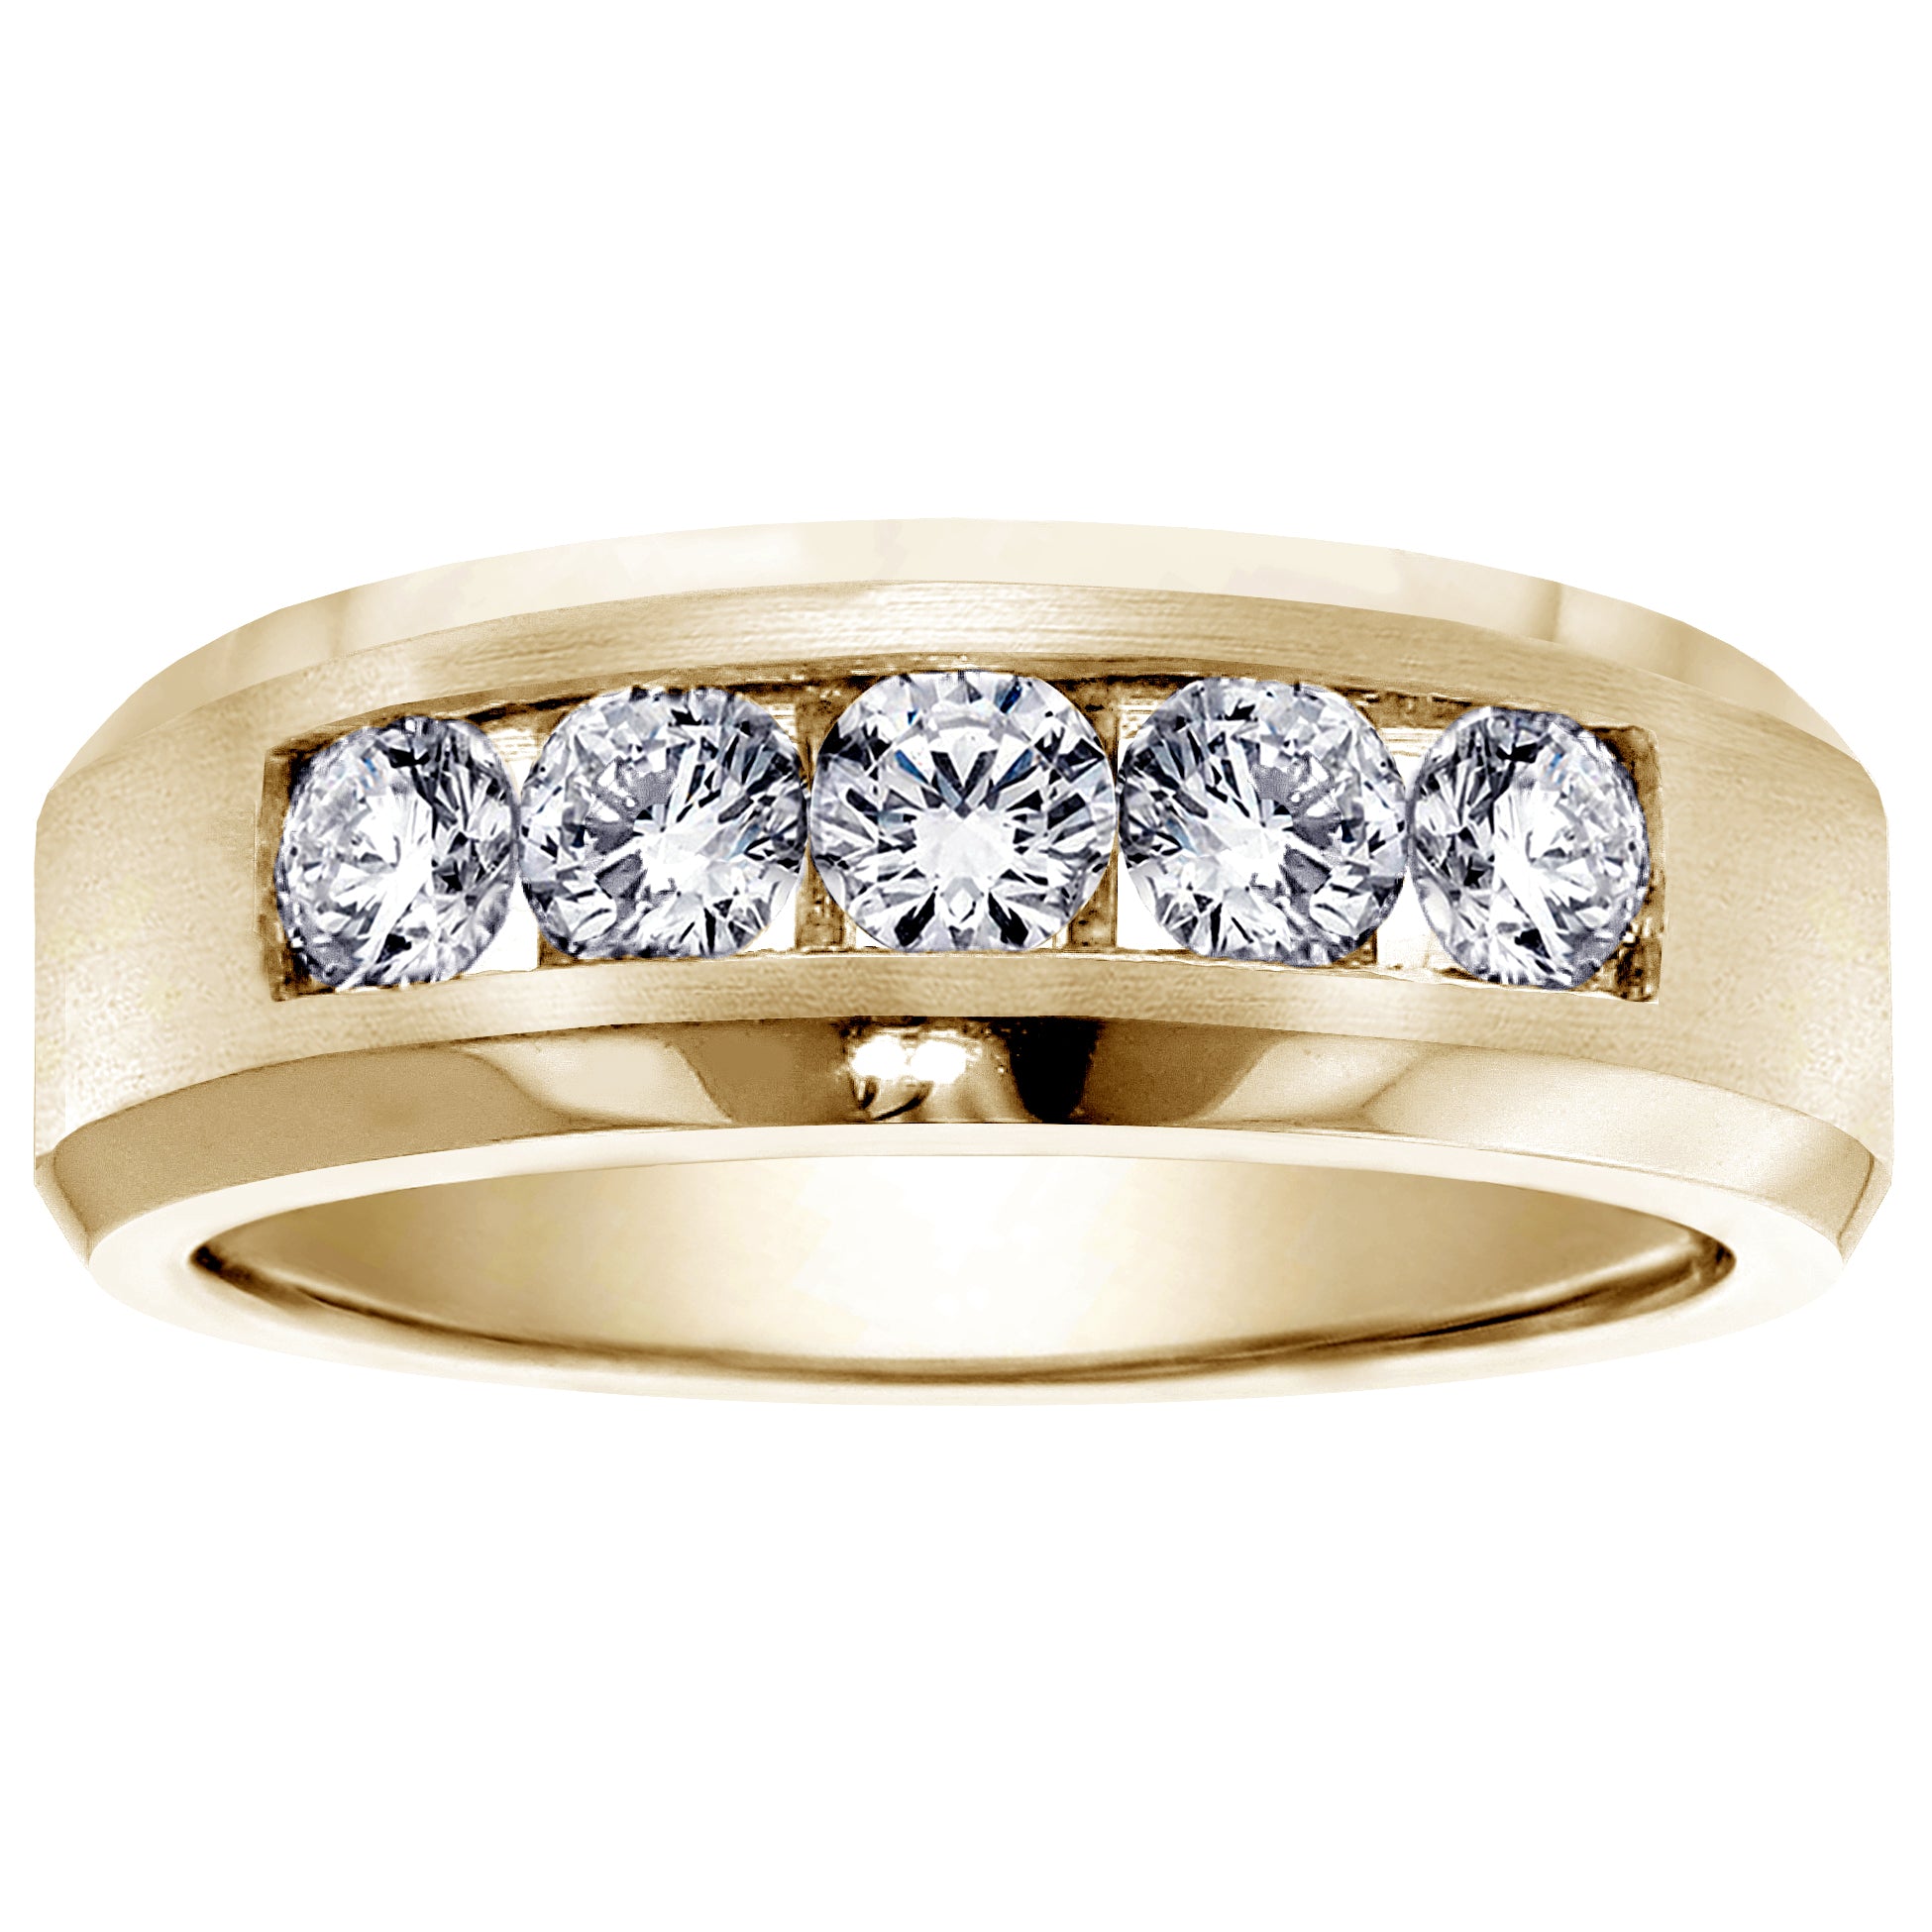 1.00 CT 5-Stone Channel Set Diamond Mens Wedding Ring in 14k White/Yellow/Rose Gold